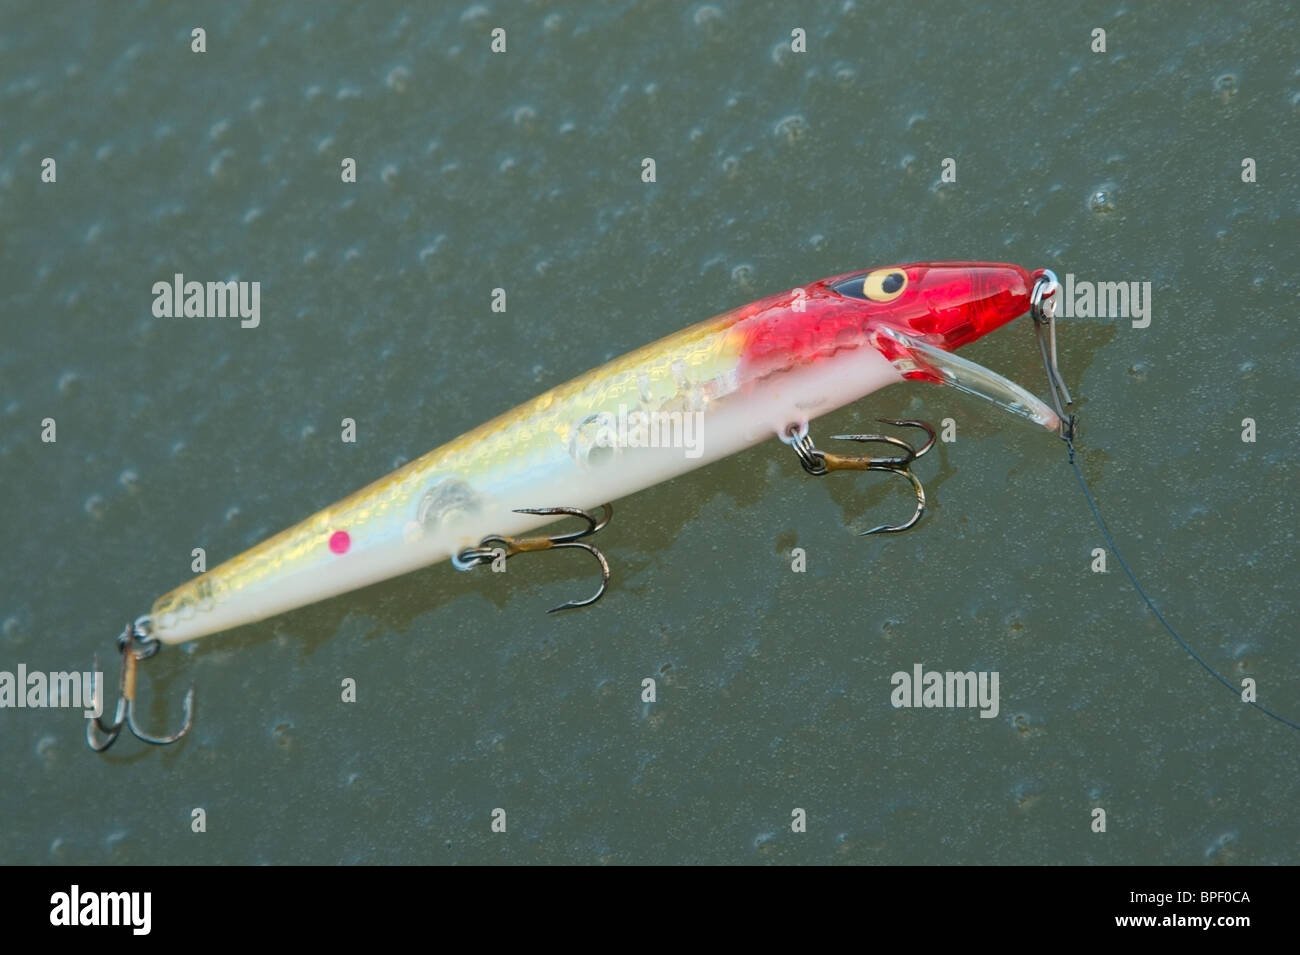 A colourful fishing lure laying on the ice Stock Photo